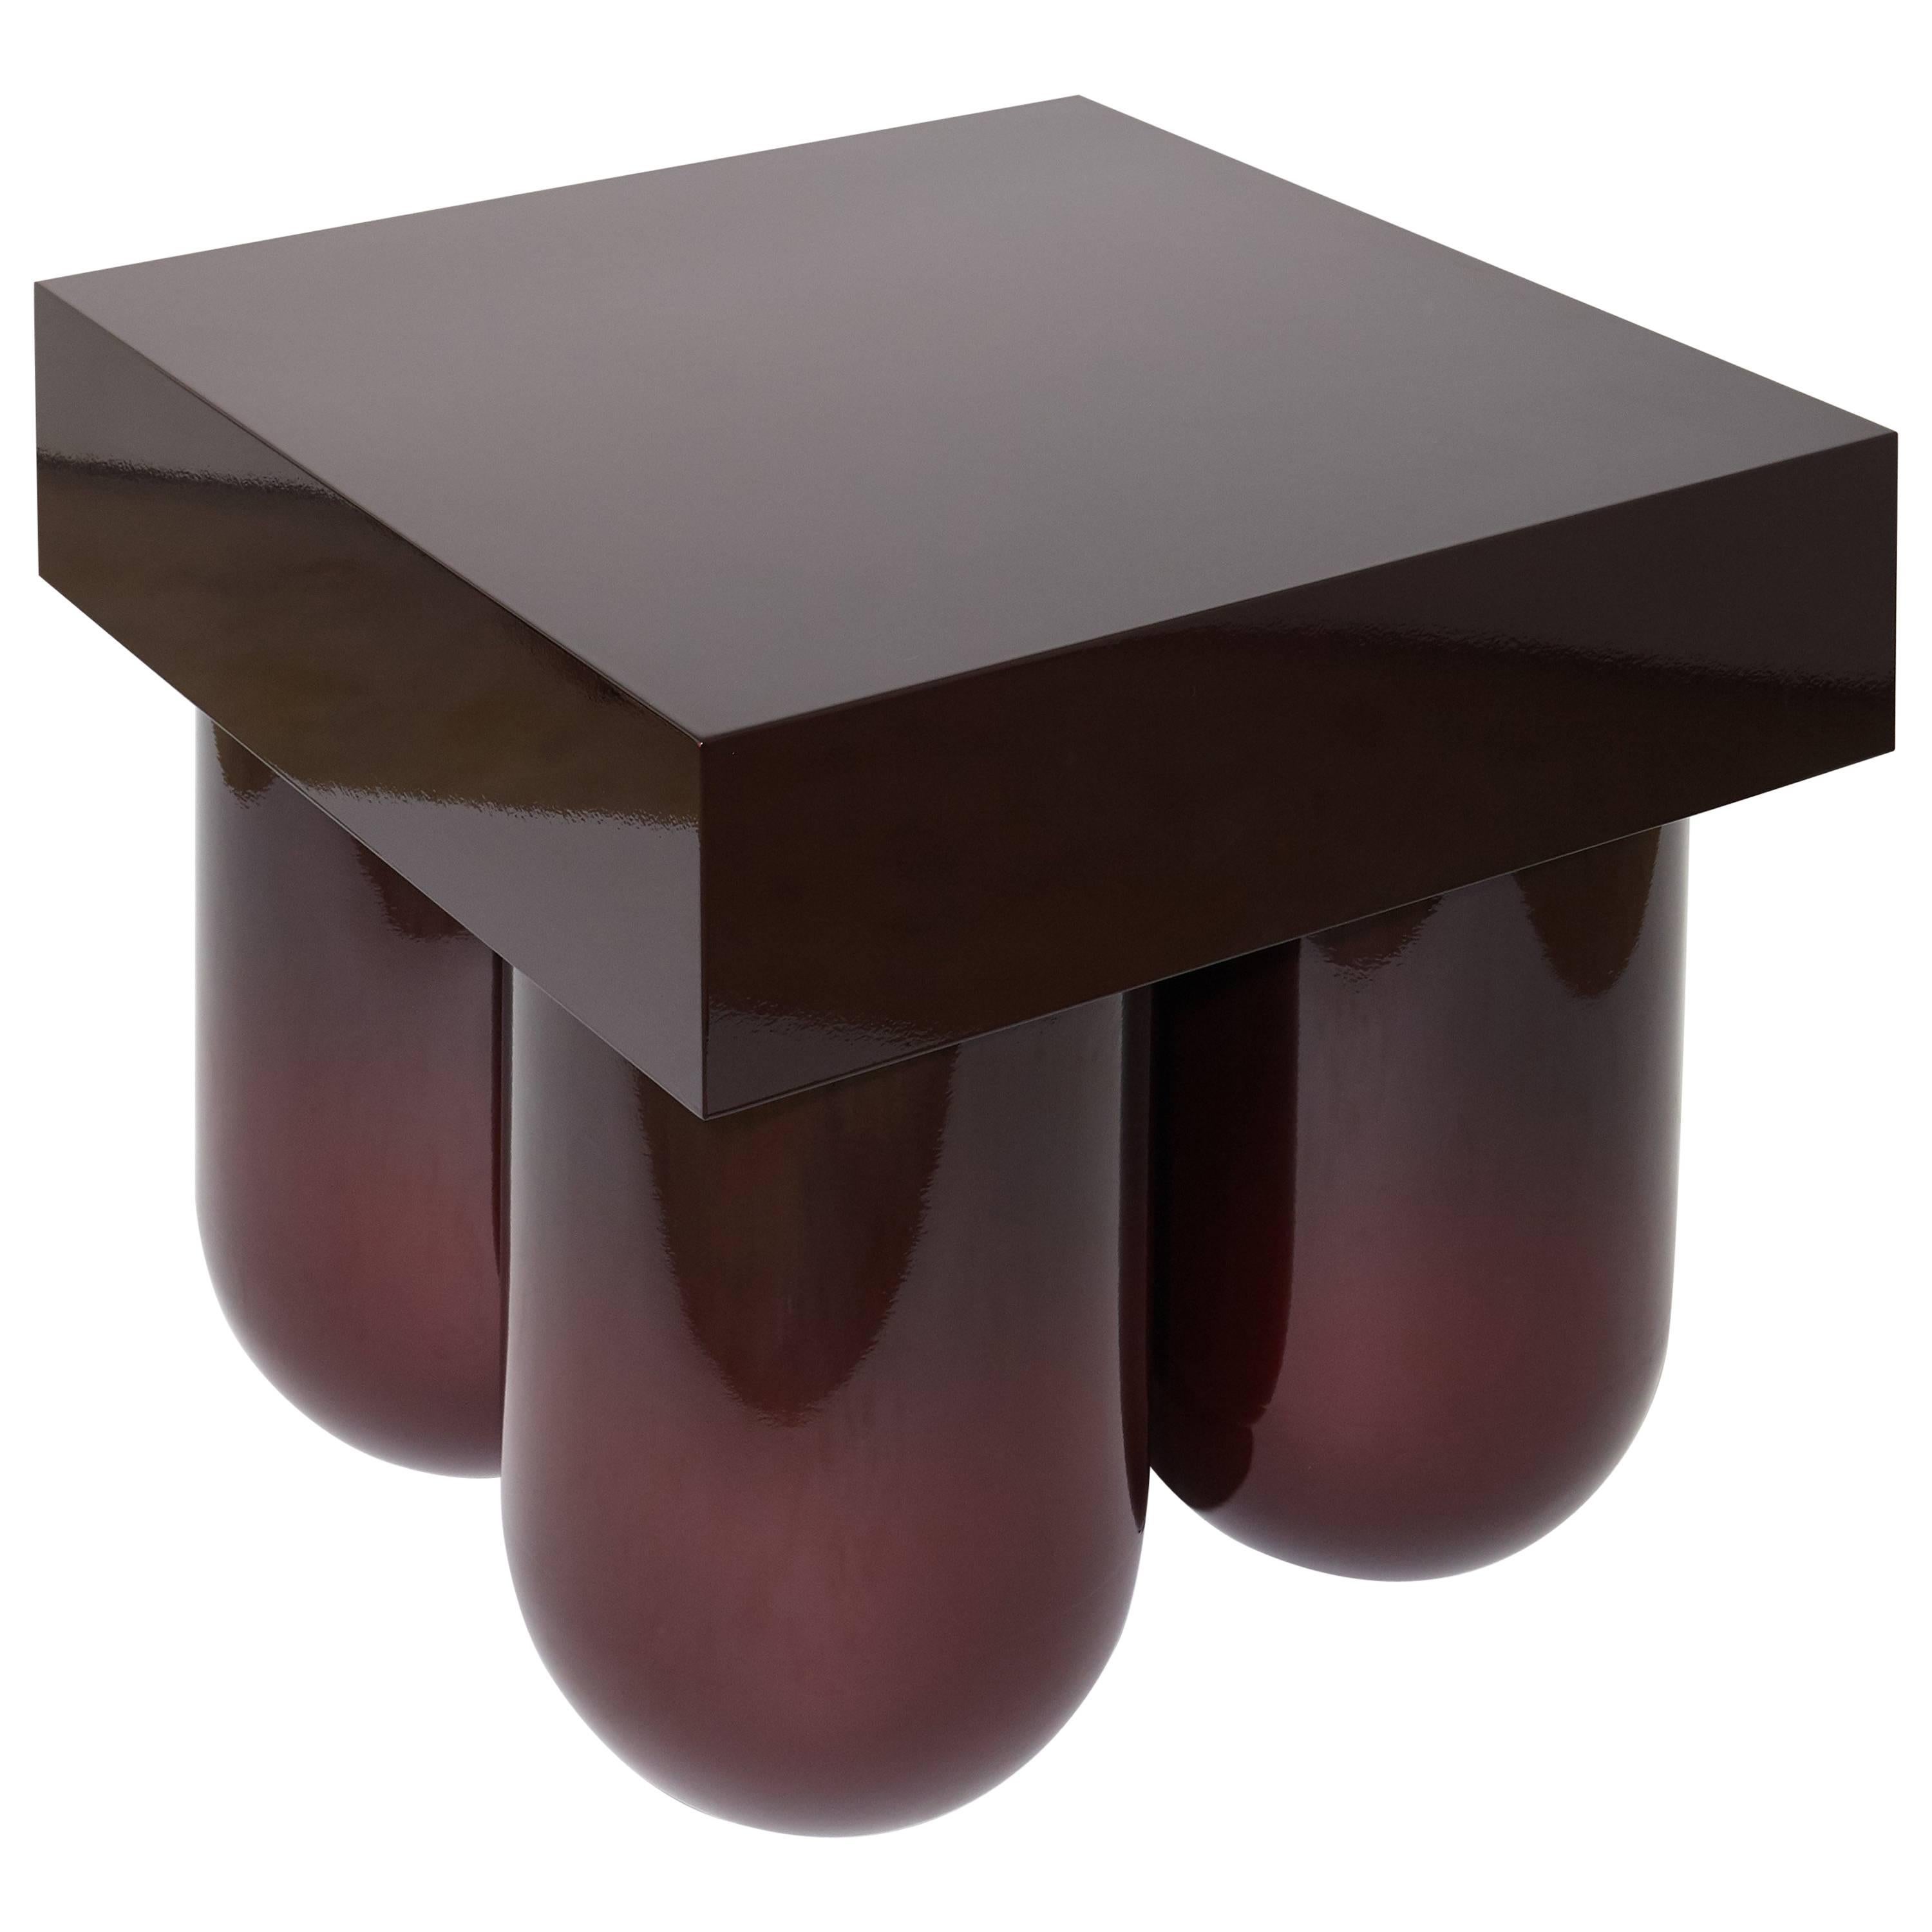 Tubular Legged Cocktail or Side Table in Carved Wood and Customizable Lacquer